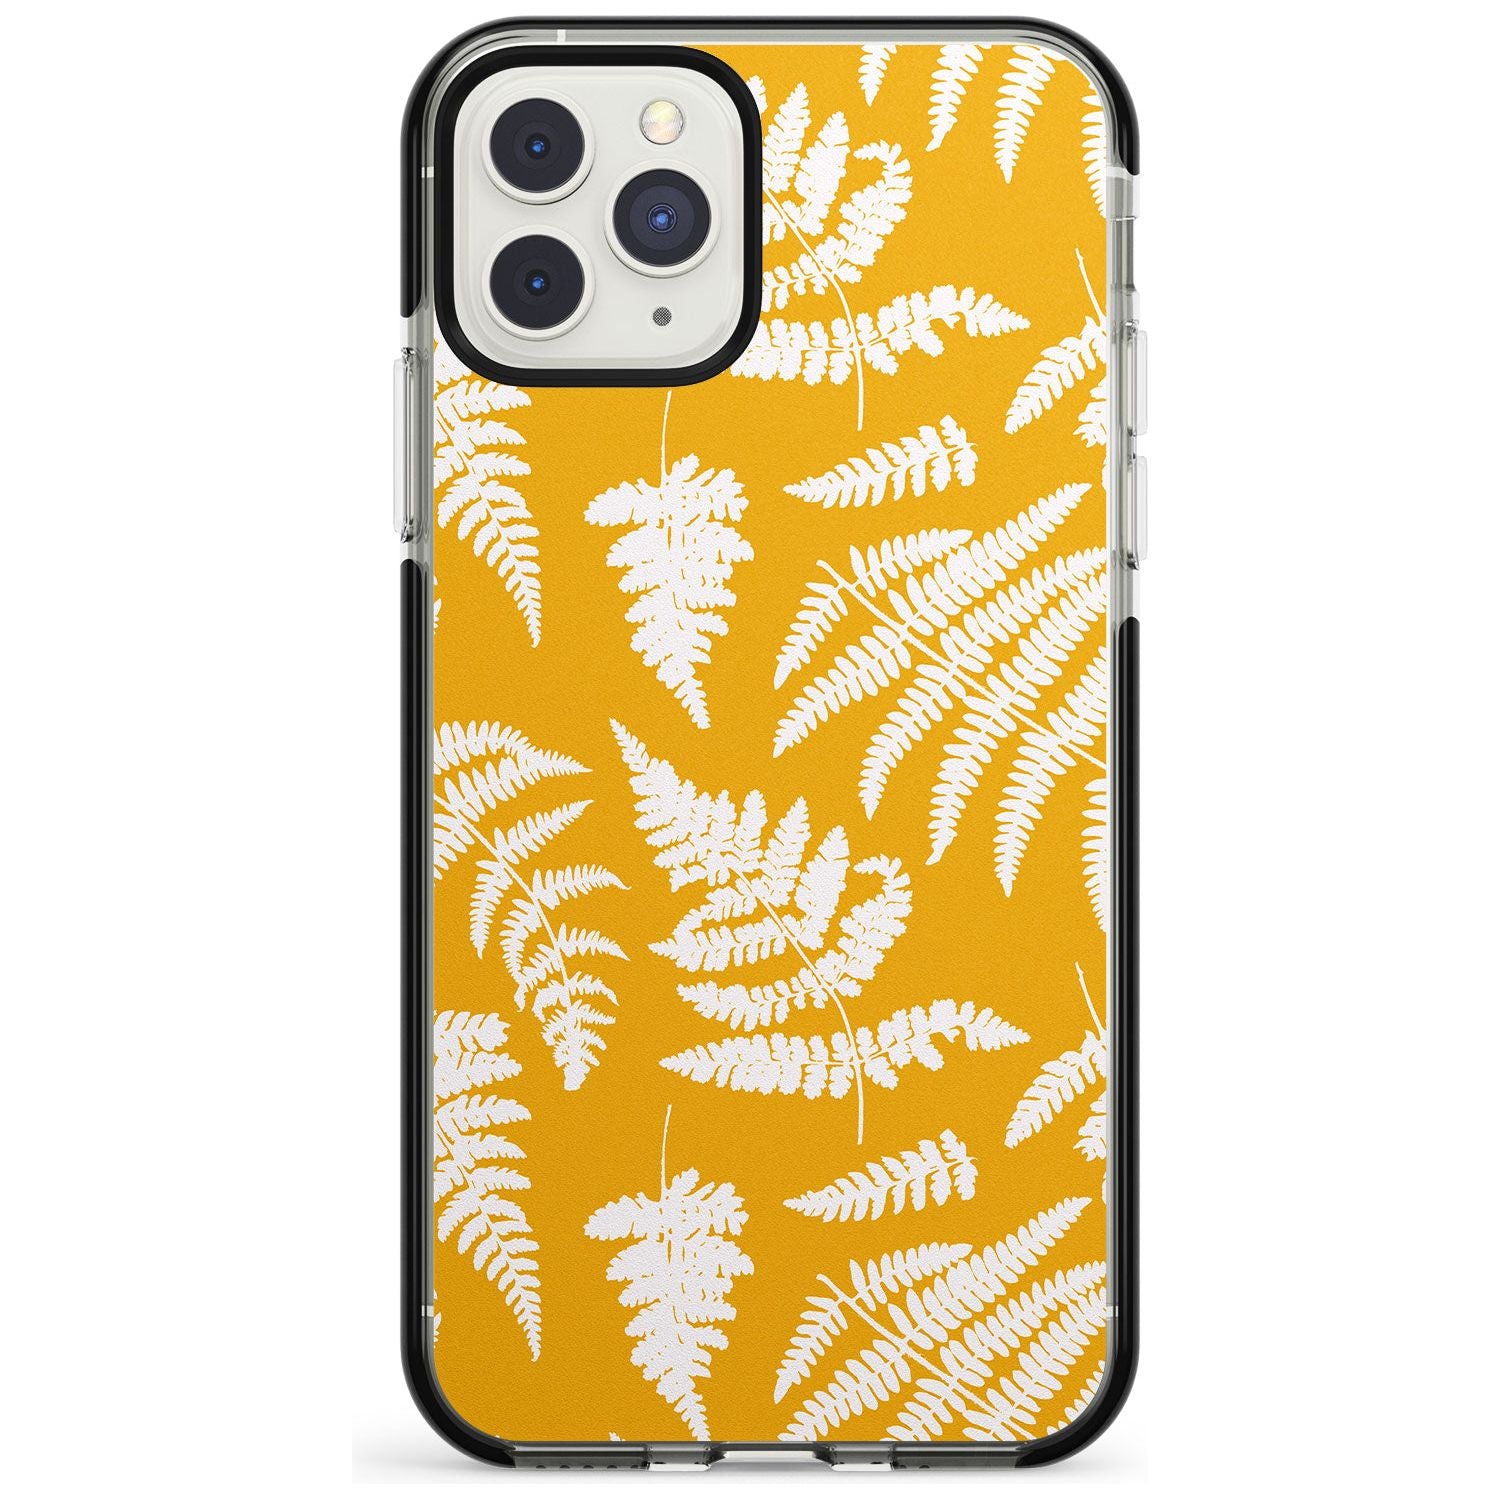 Fern Pattern on Yellow Black Impact Phone Case for iPhone 11 Pro Max